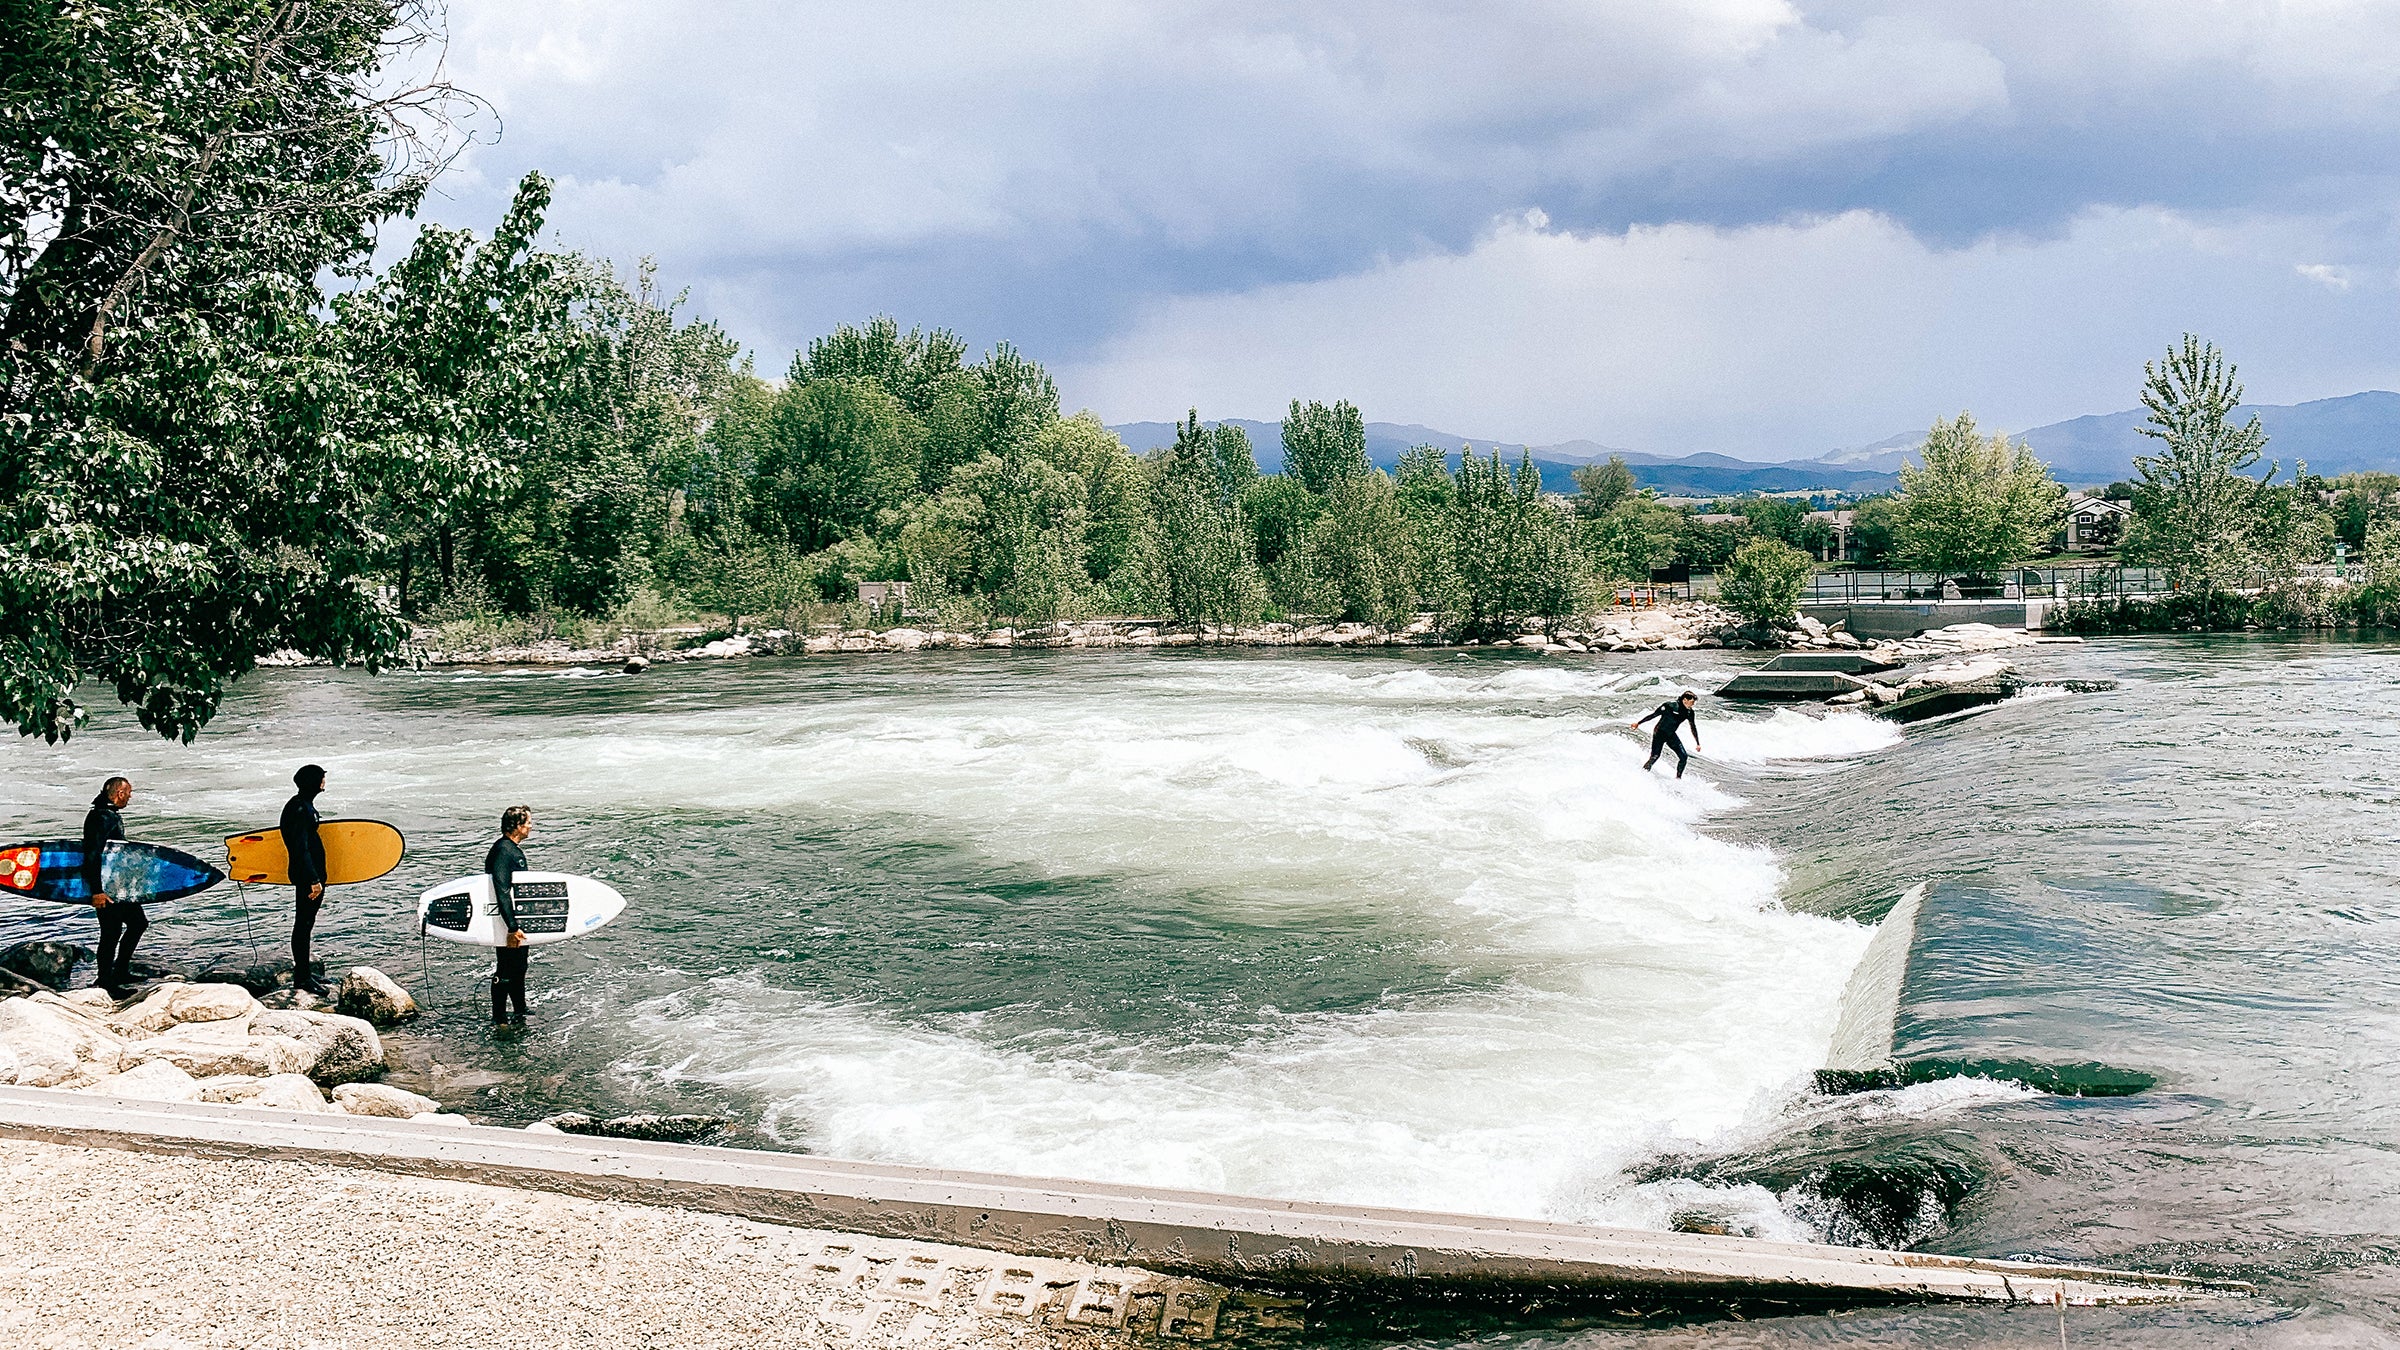 Surfing at Boise Whitewater Park